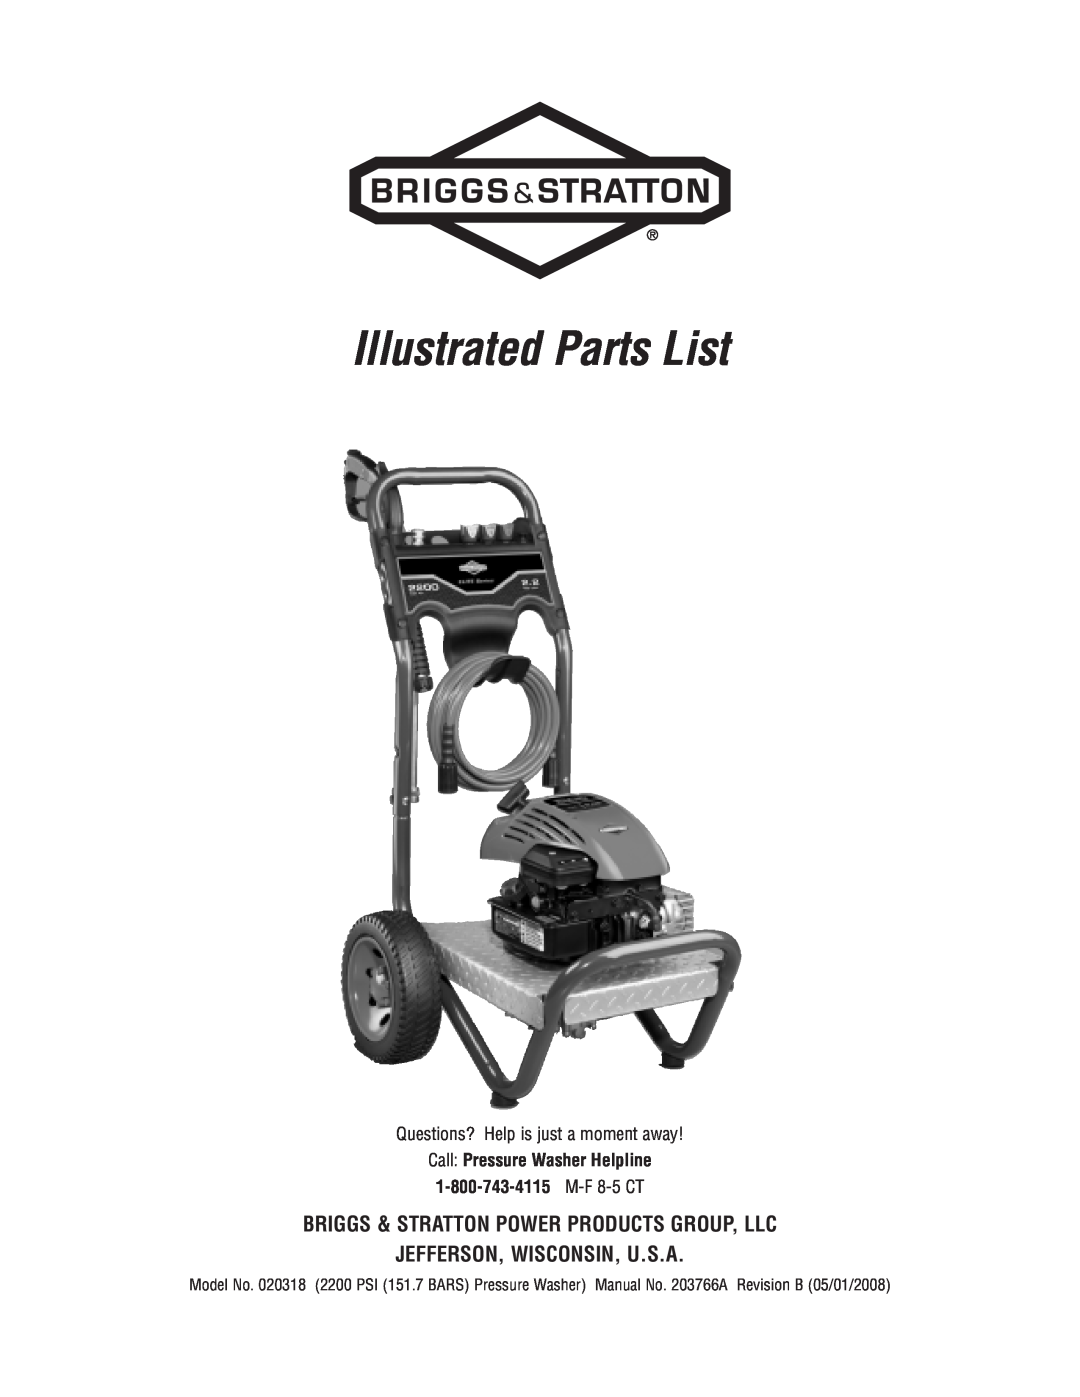 Briggs & Stratton 20318 manual Illustrated Parts List, Briggs & Stratton Power Products Group, Llc 